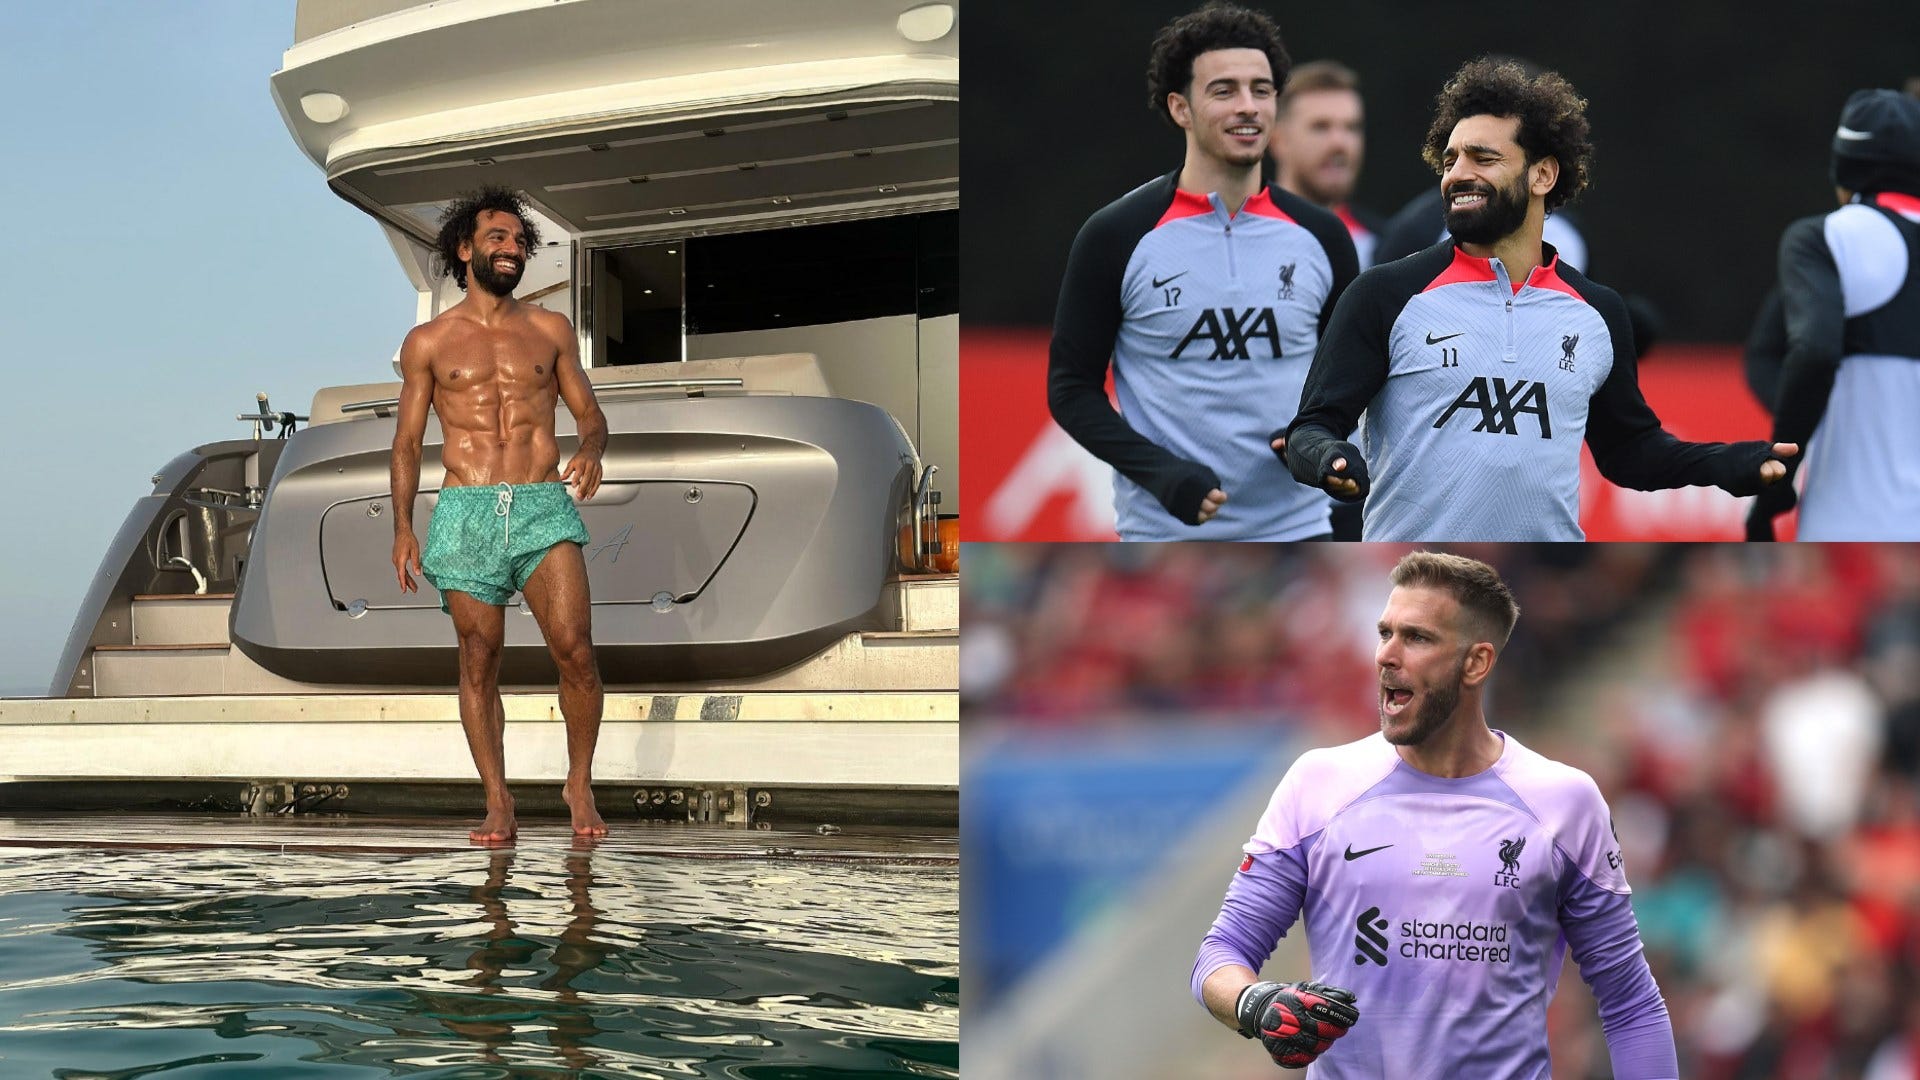 Mohamed Salah shows off his shiny ripped physique on a yacht as Curtis Jones & Adrian pile on & jokingly mock Liverpool team-mate for posing shirtless yet again!